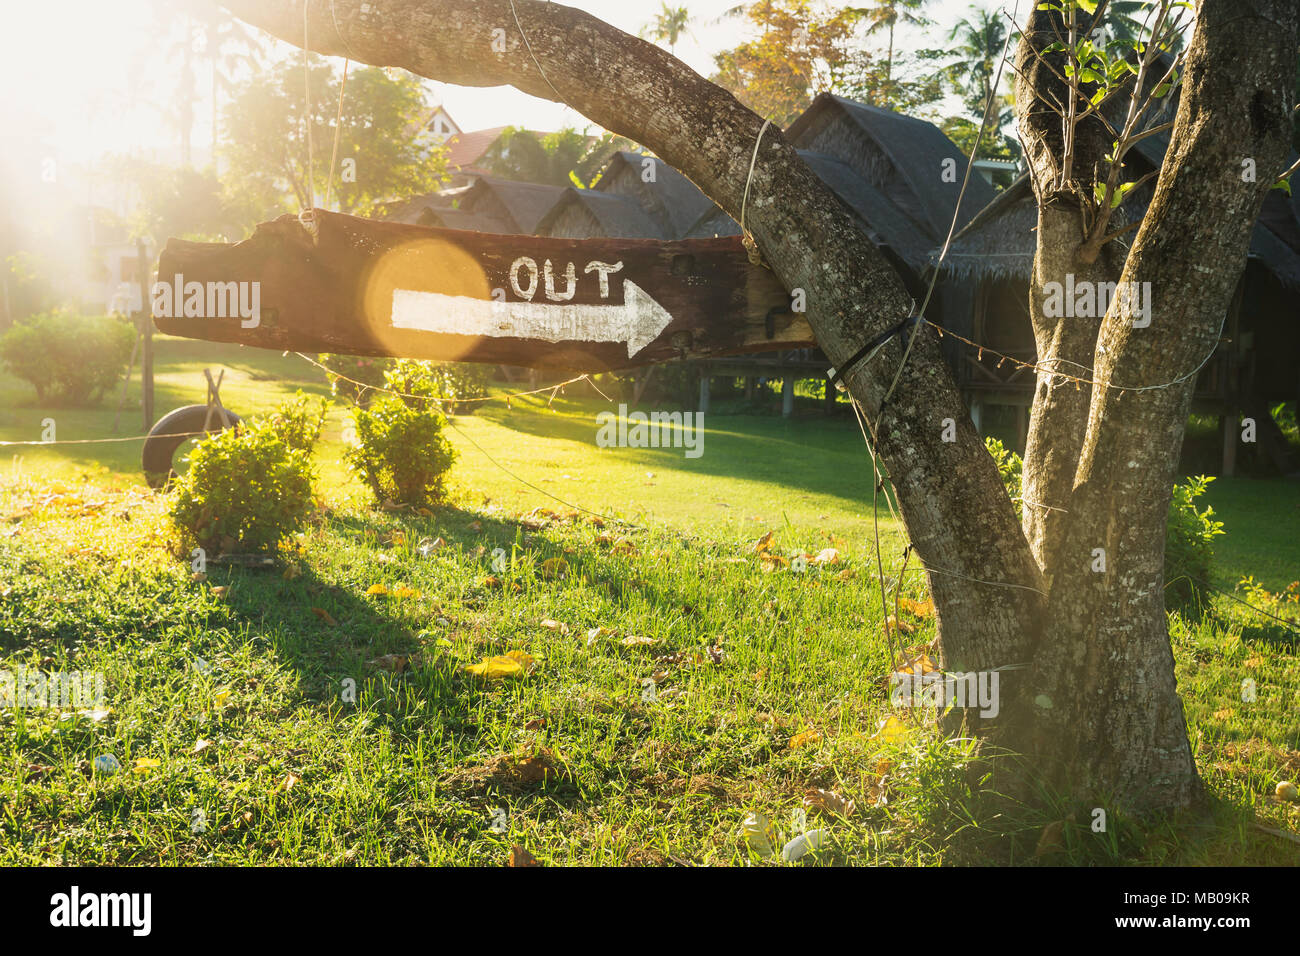 An arrow sign with the word OUT in a garden with bamboo bungolows and lens flare from sunshine in Koh Lanta, Thailand Stock Photo